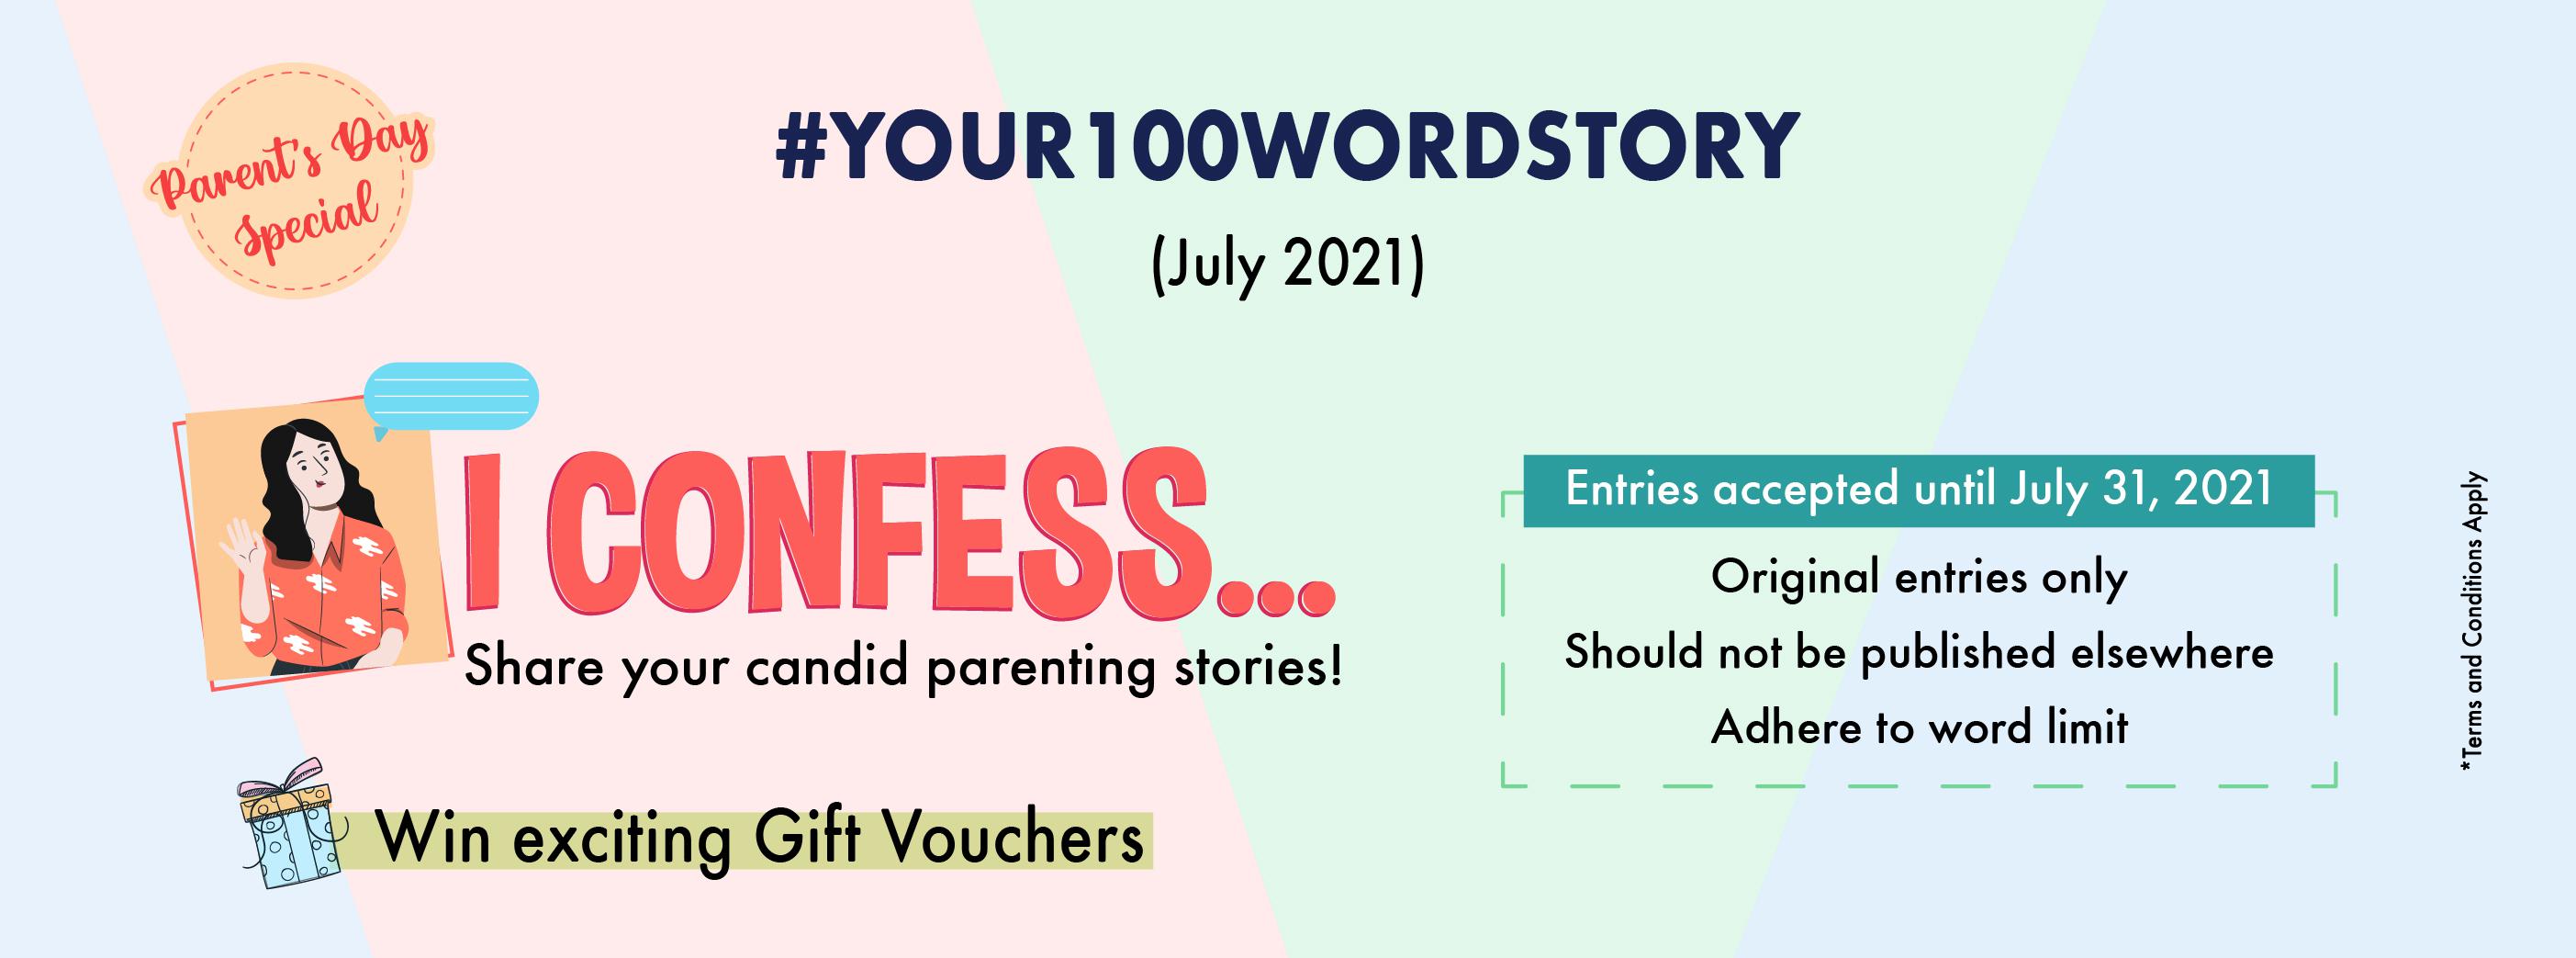 #Your100WordStory : I CONFESS...  Share your candid parenting confessions | JULY 2021